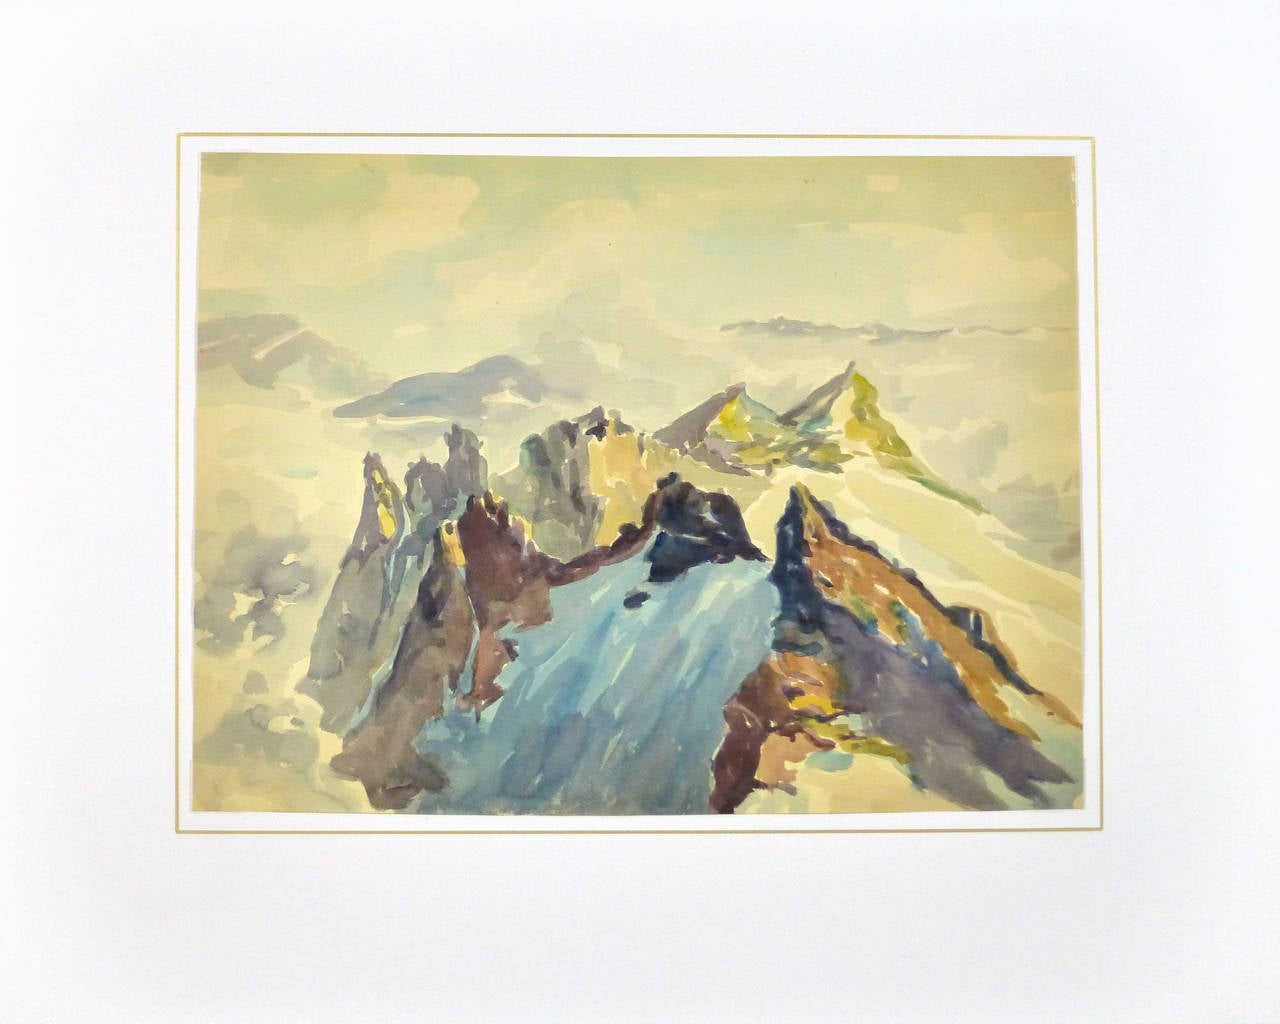 Impressive watercolor landscape of jagged mountain peaks reaching up into the clouds by artist Wilheim Kloden, circa 1960.

Original vintage one-of-a-kind artwork on paper displayed on a white mat with a gold border. Mat fits a standard-size